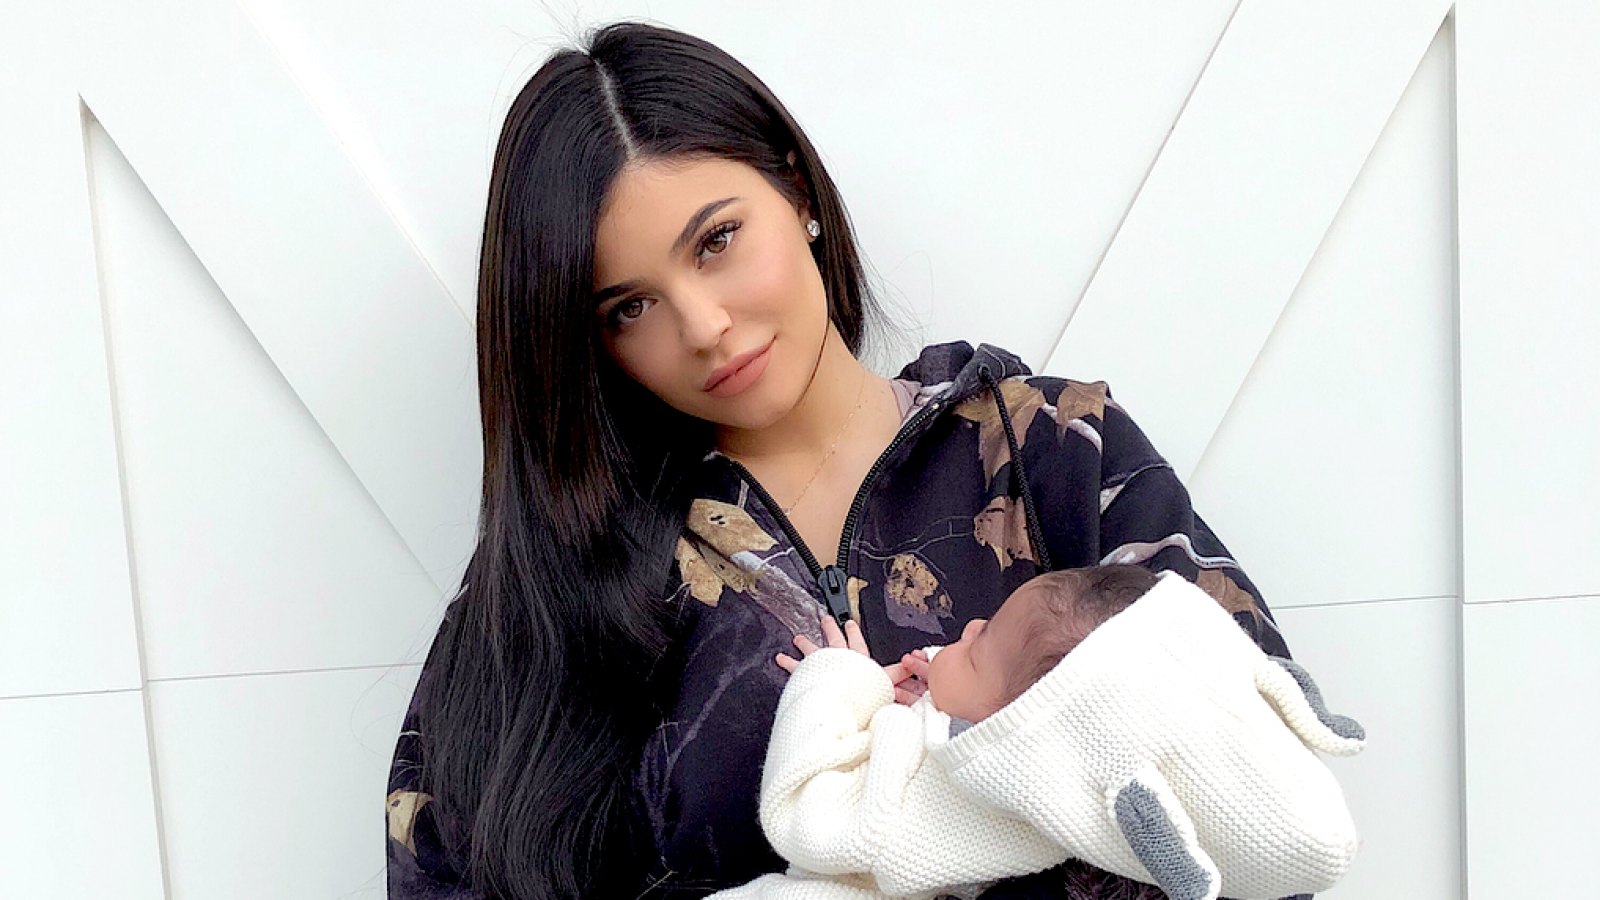 Inside Kylie Jenner's $16,000 snow wardrobe with rabbit fur scarves and  lambskin gloves – The Sun